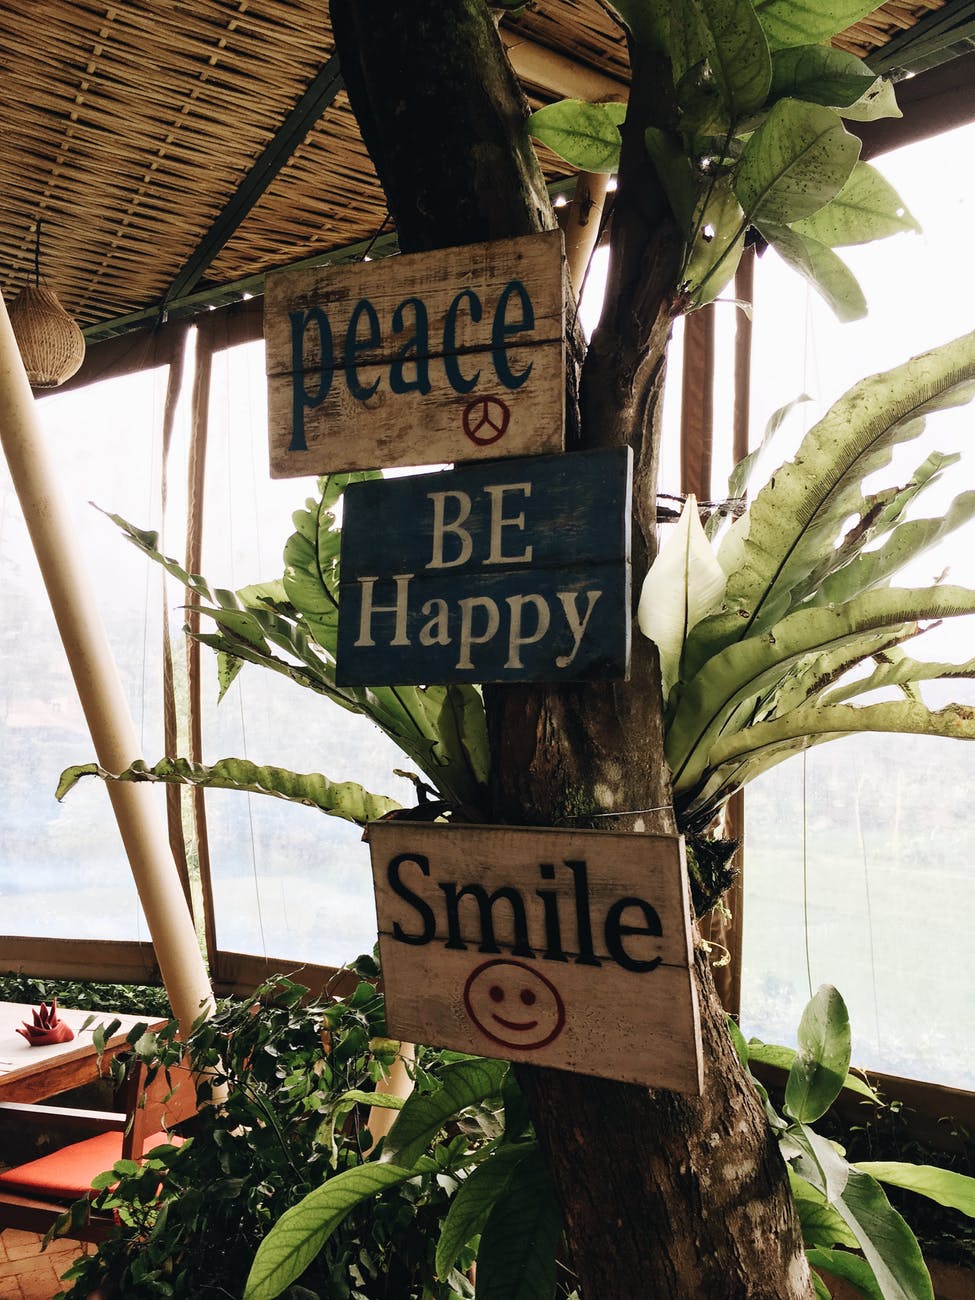 Peace, be happy, smile image